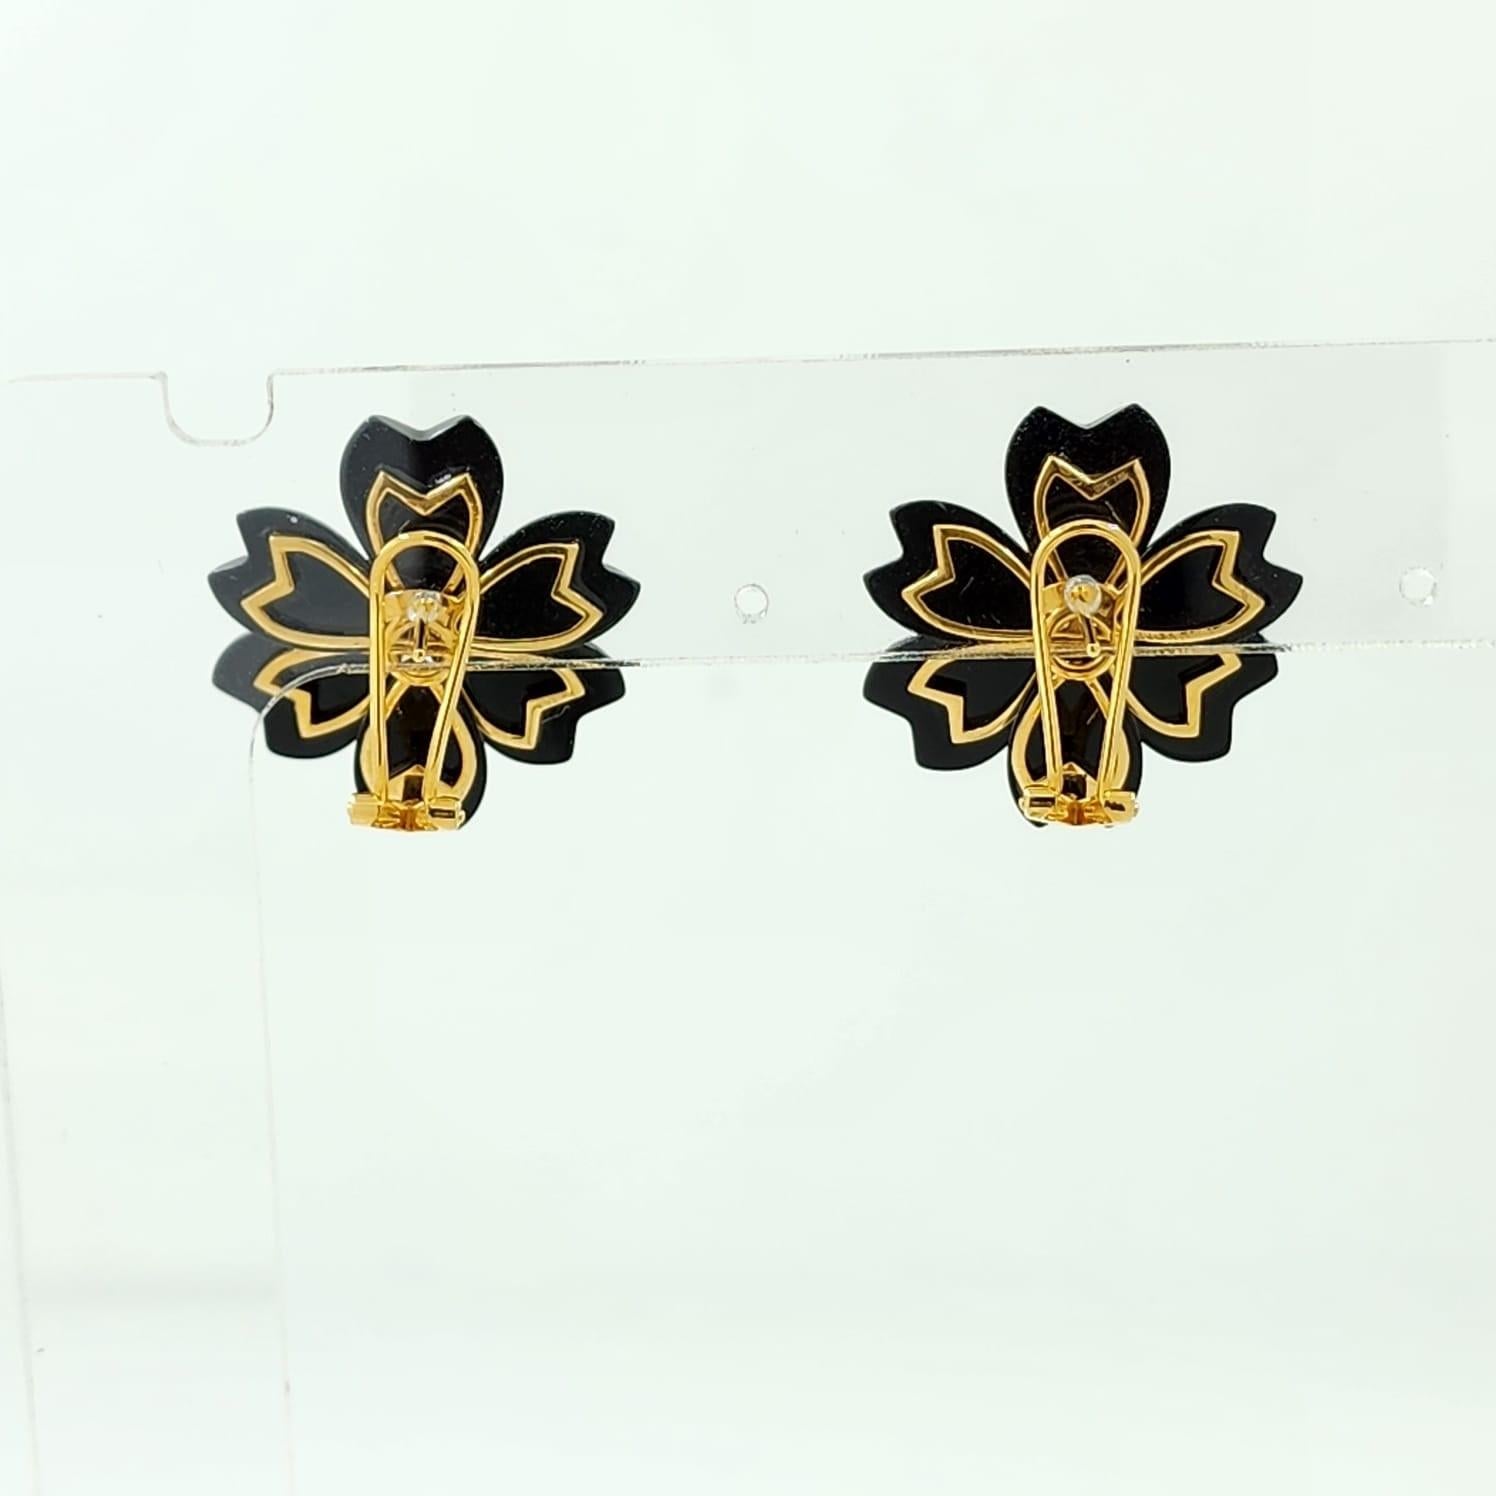 Uncut Onyx and Diamond Earring in 18K Gold plated Sterling Silver